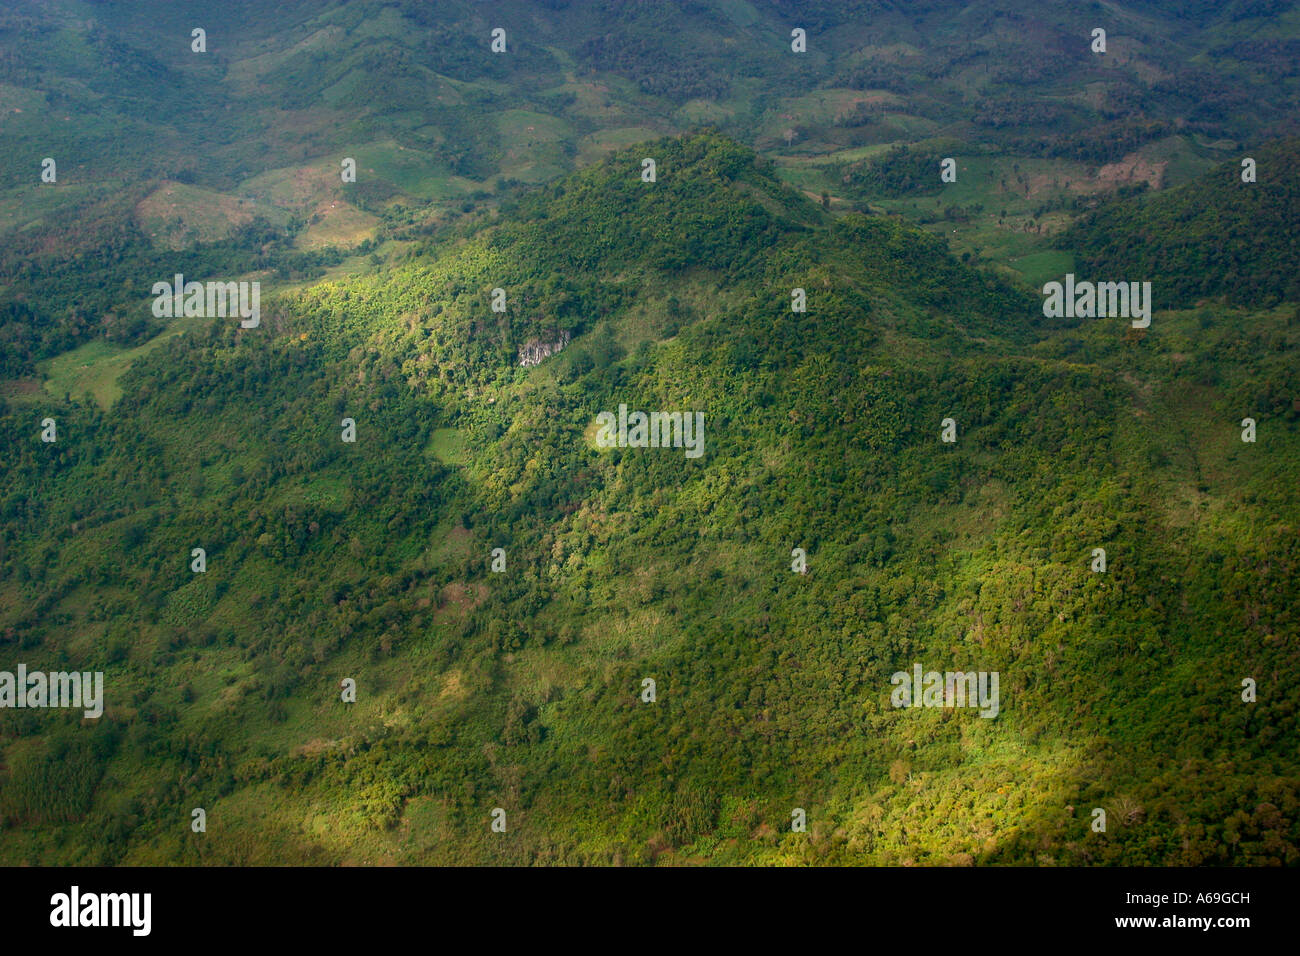 Laos aerial wooded hills near Luang Prabang showing deforested clearings Stock Photo